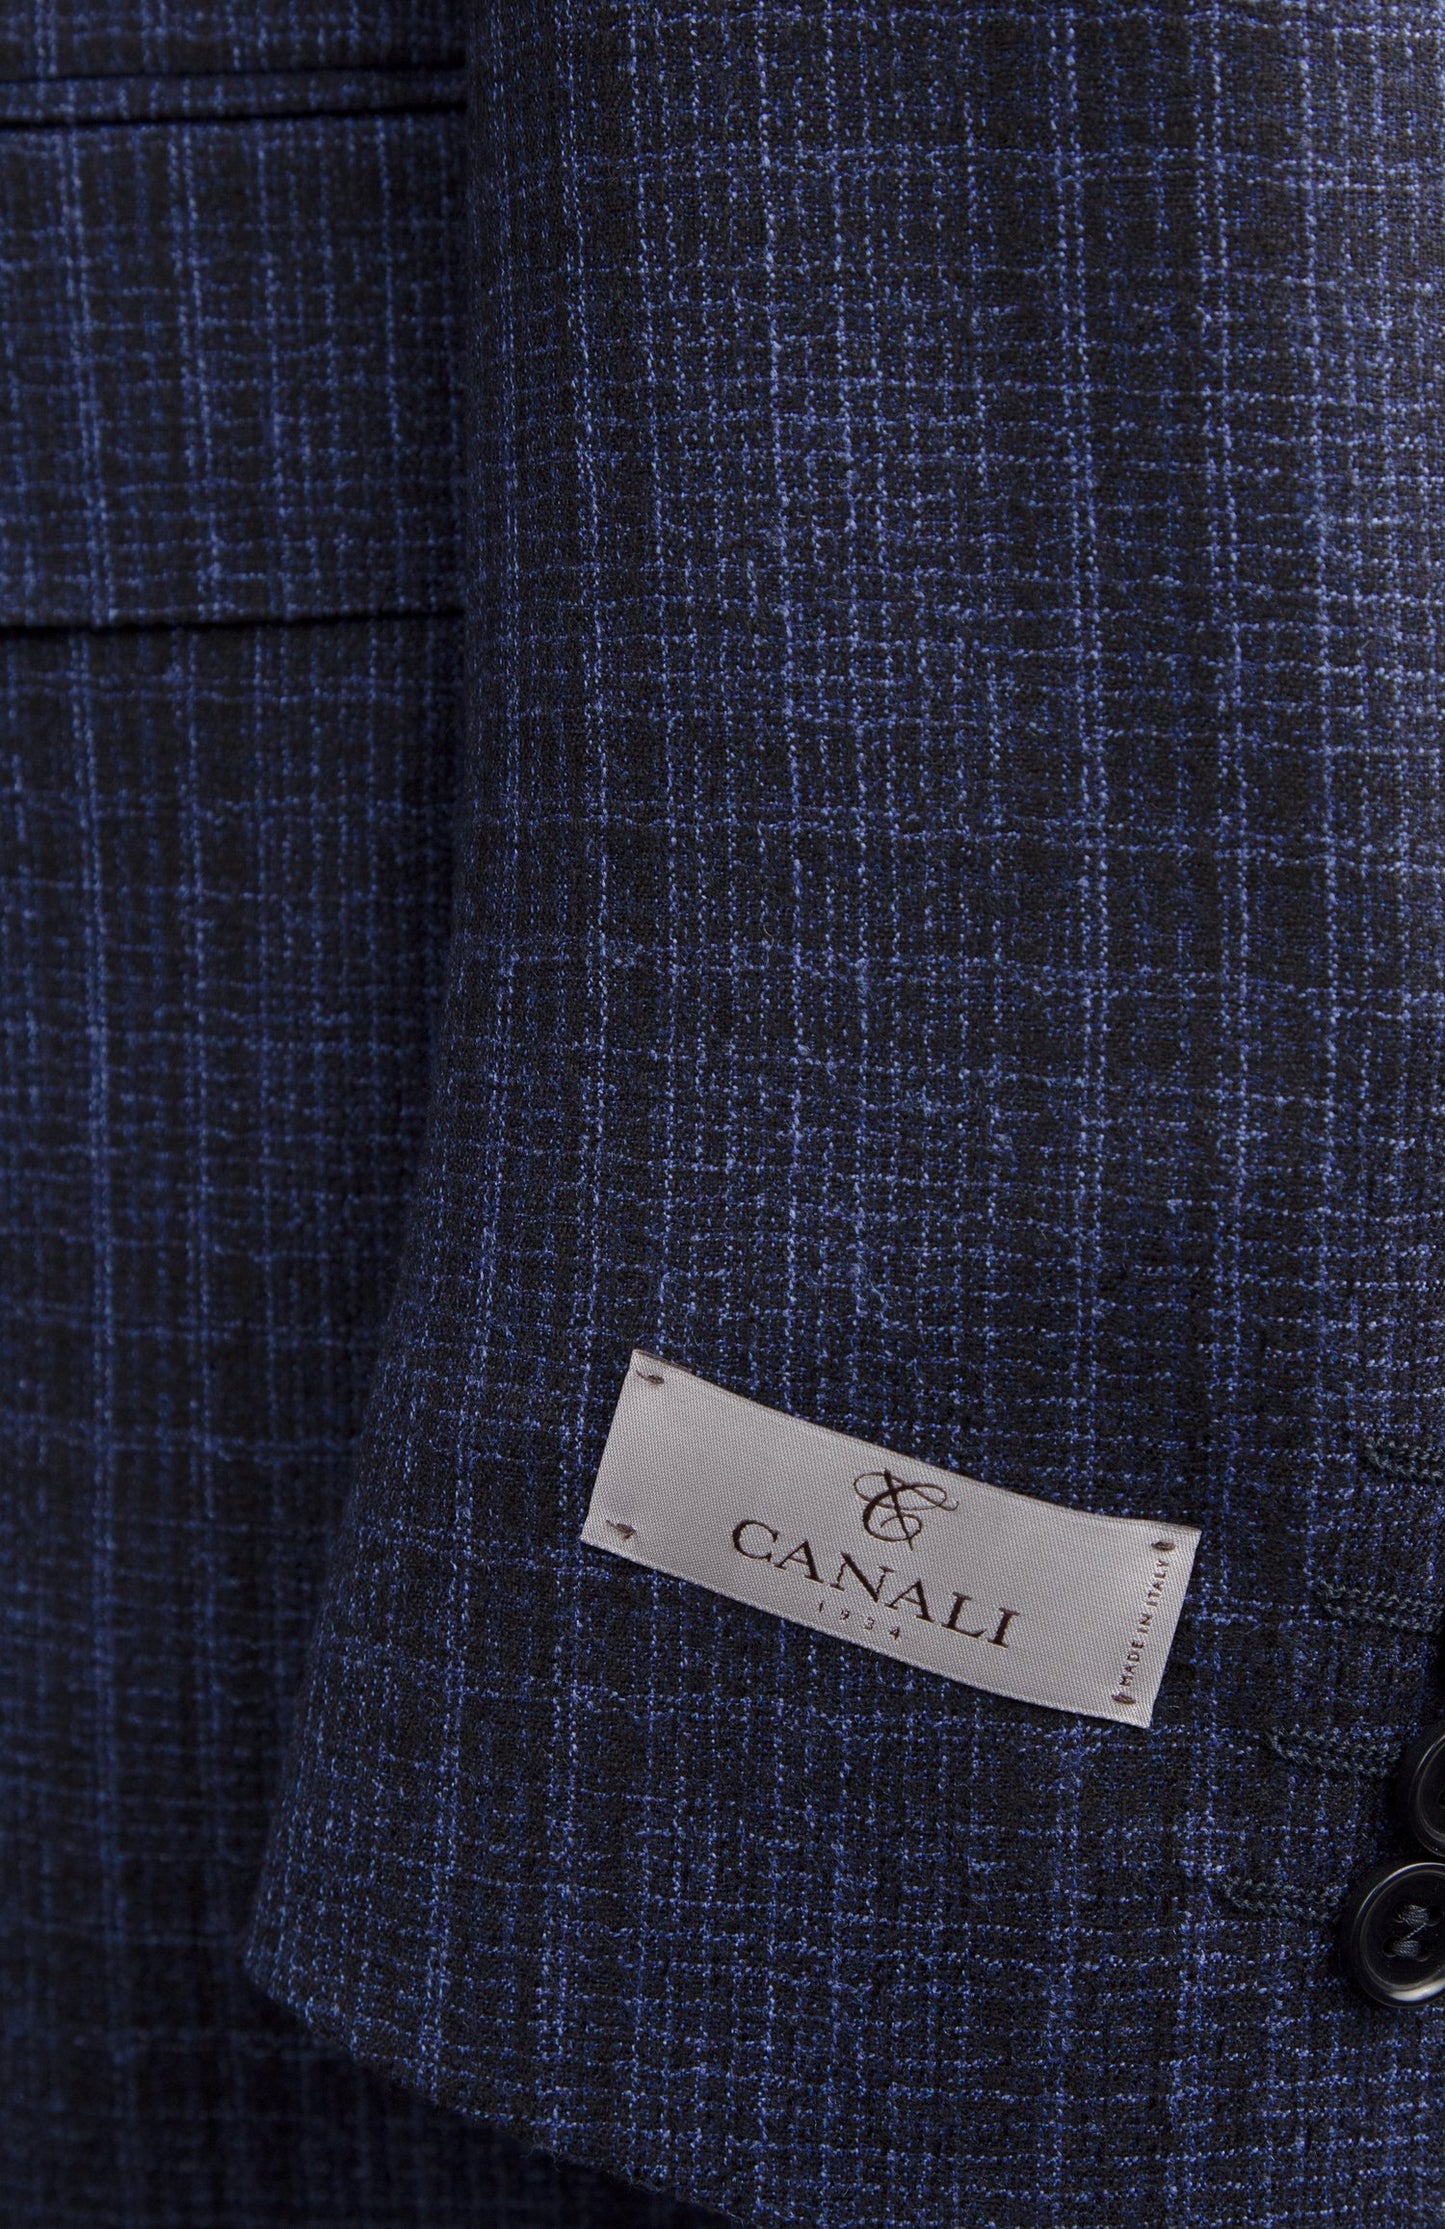 Canali Siena Model Wool Sport Coat in Navy and Light Blue Prince of Wales